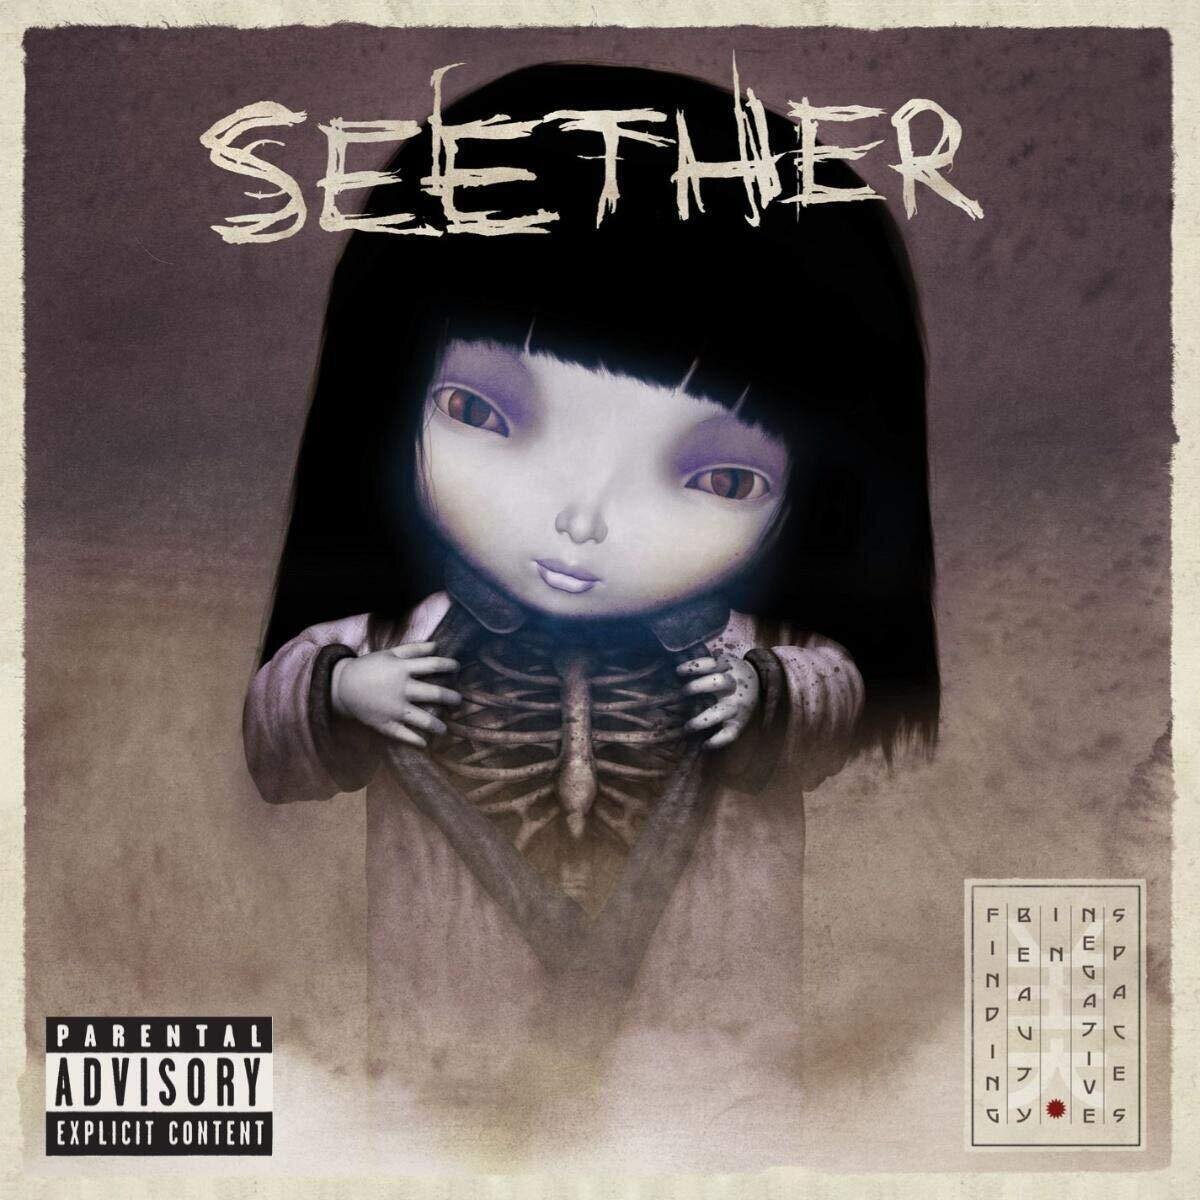 Disco de vinil Seether - Finding Beauty In Negative Spaces (Limited Edition) (2 LP)